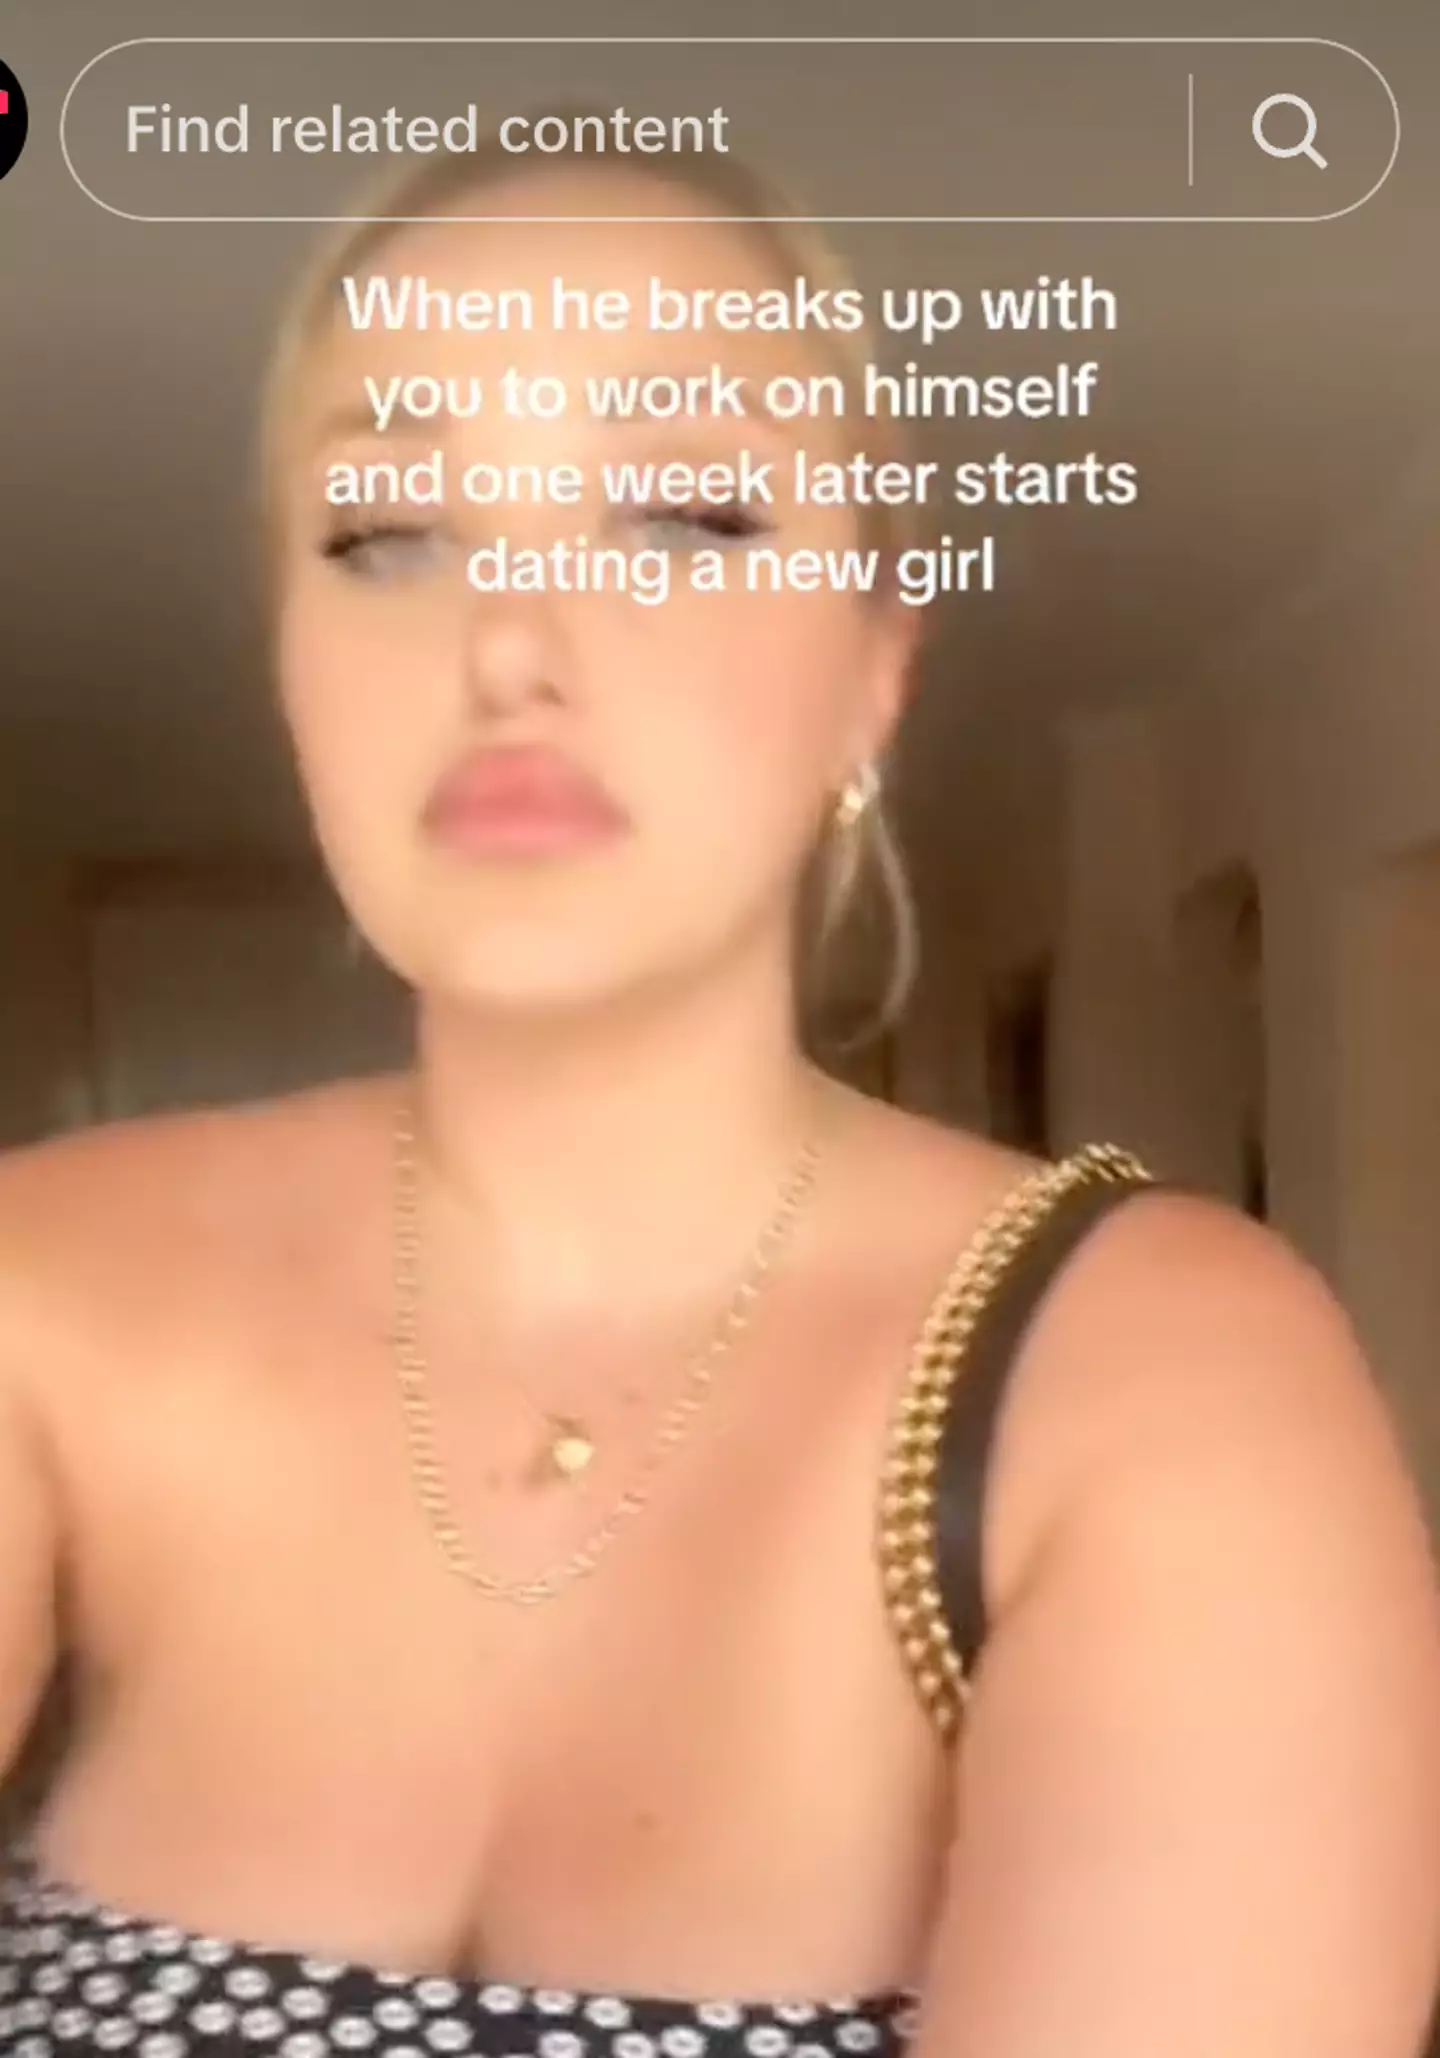 Emma claims her ex started dating a new girl one week later.